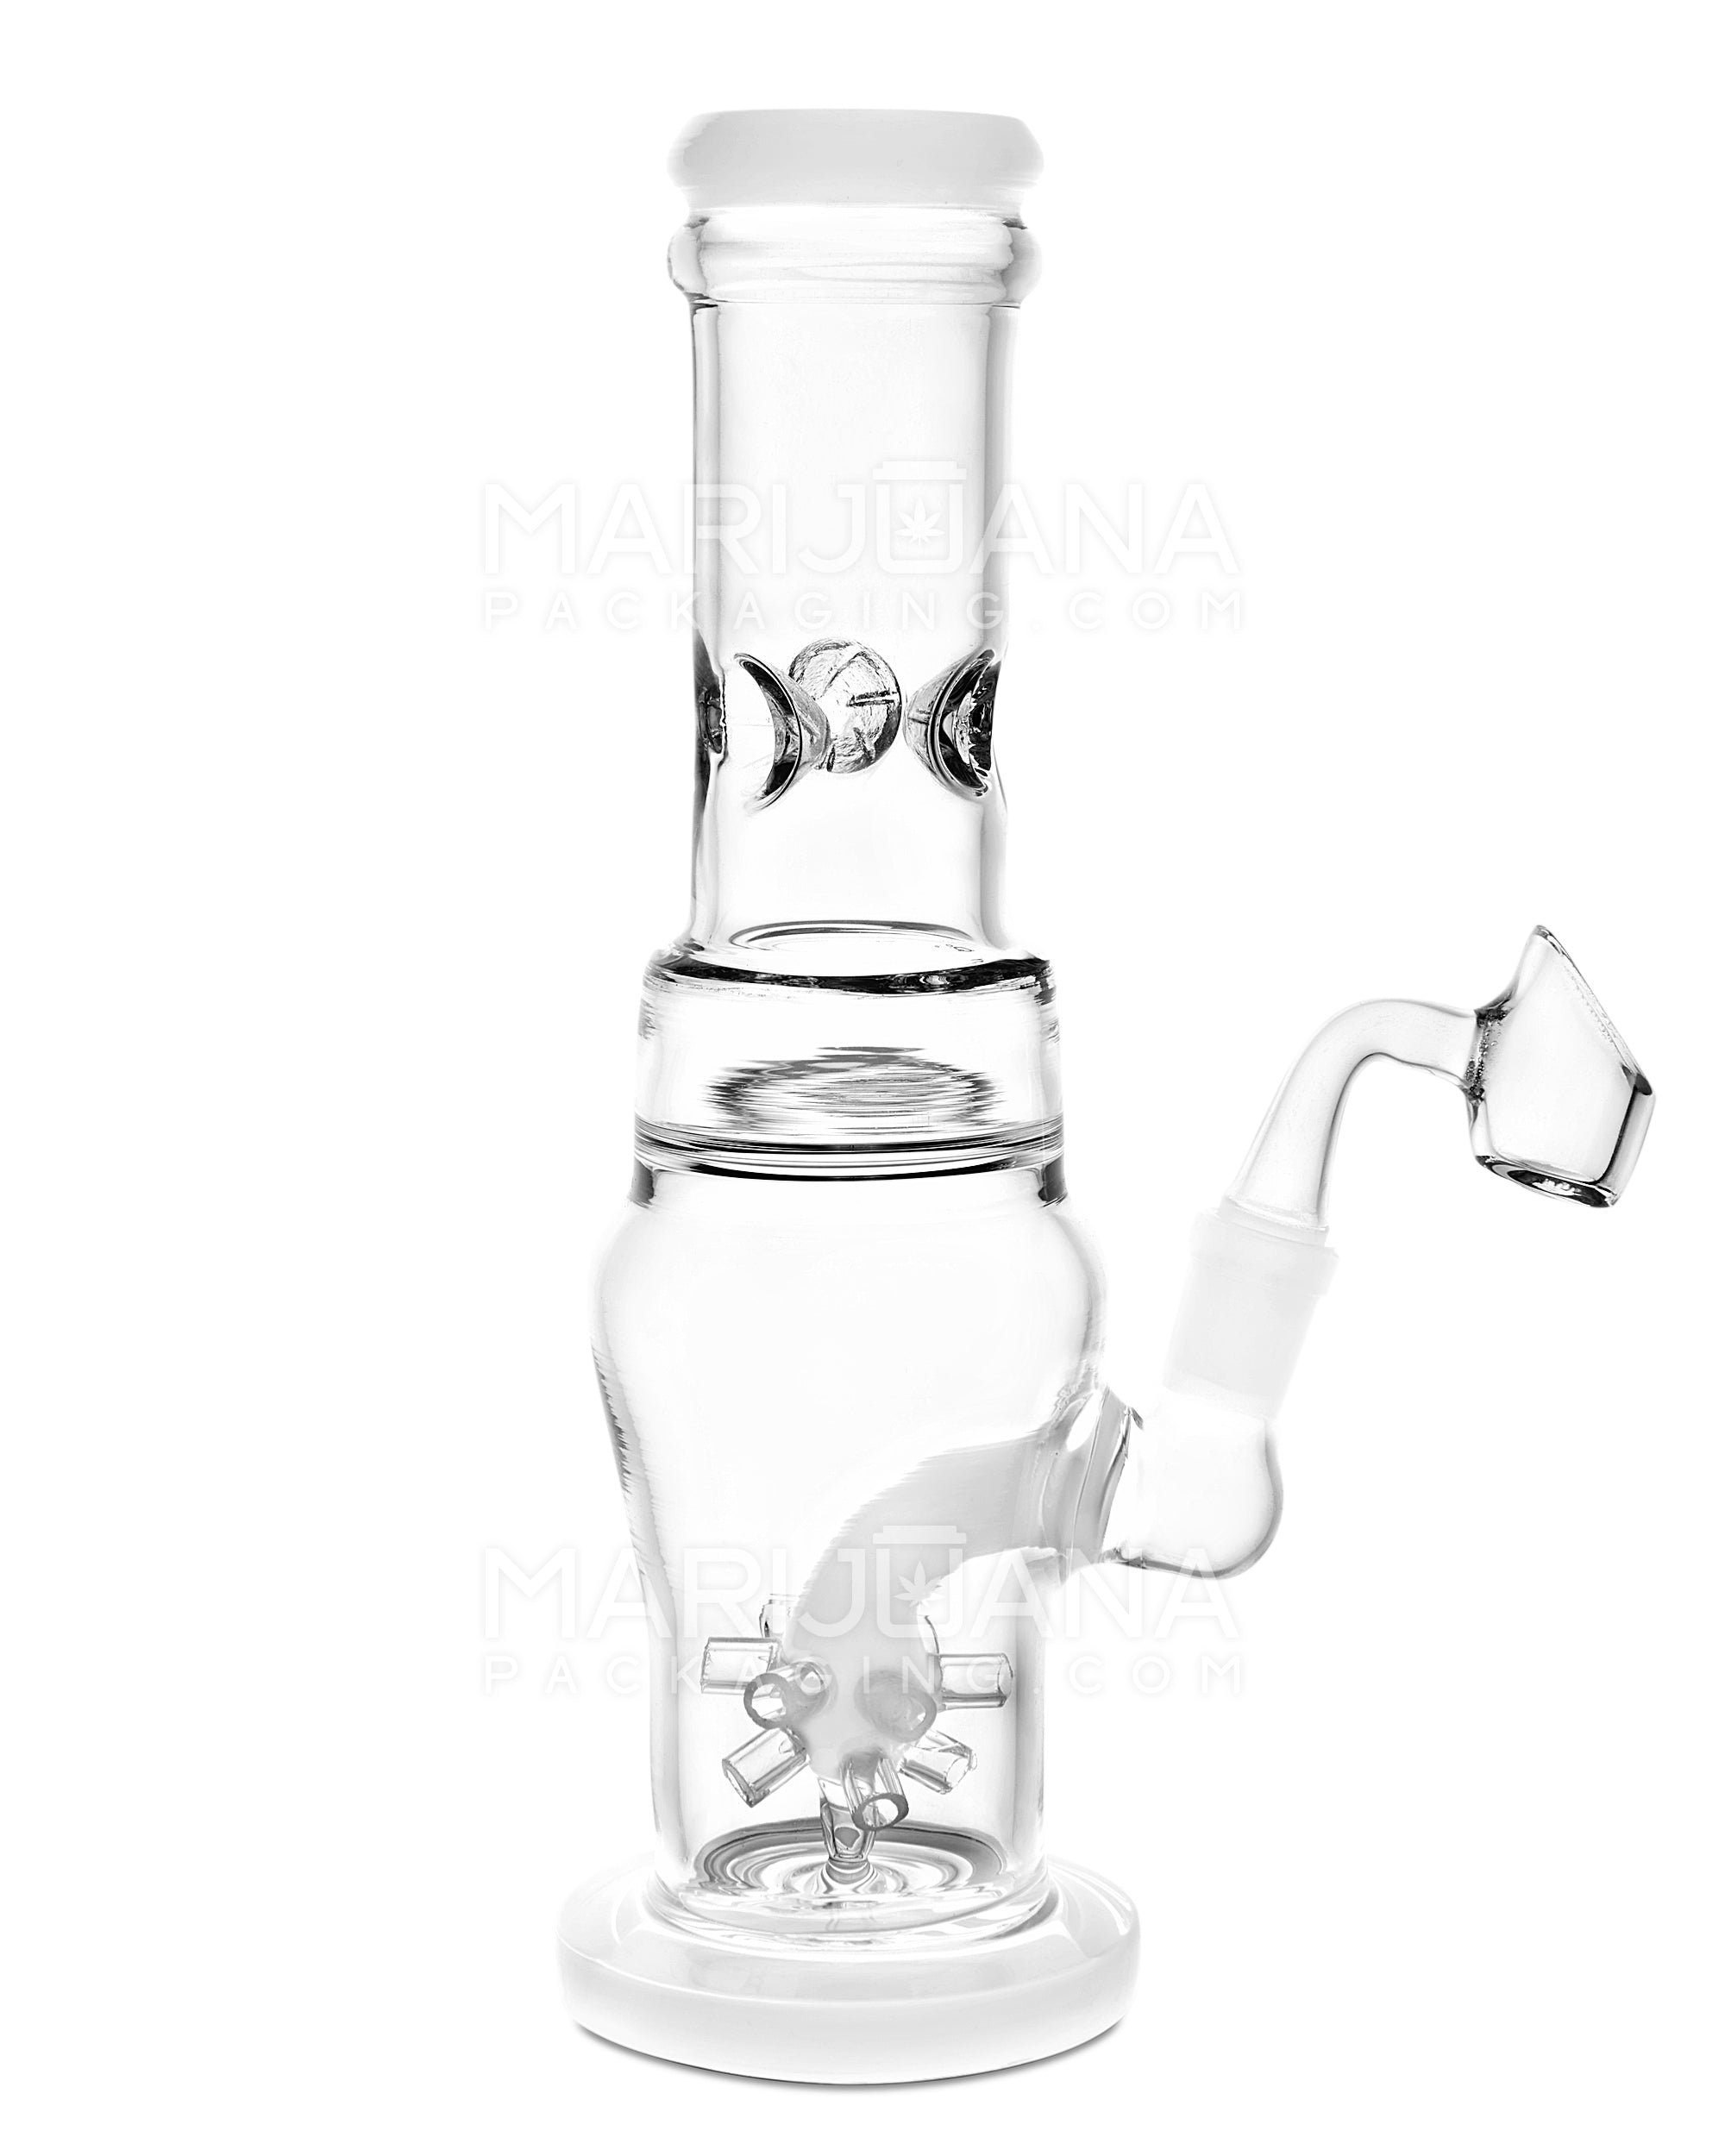 Straight Neck Atomic Perc Dab Rig w/ Ice Catcher & Thick Base | 10in Tall - 14mm Banger - White - 1